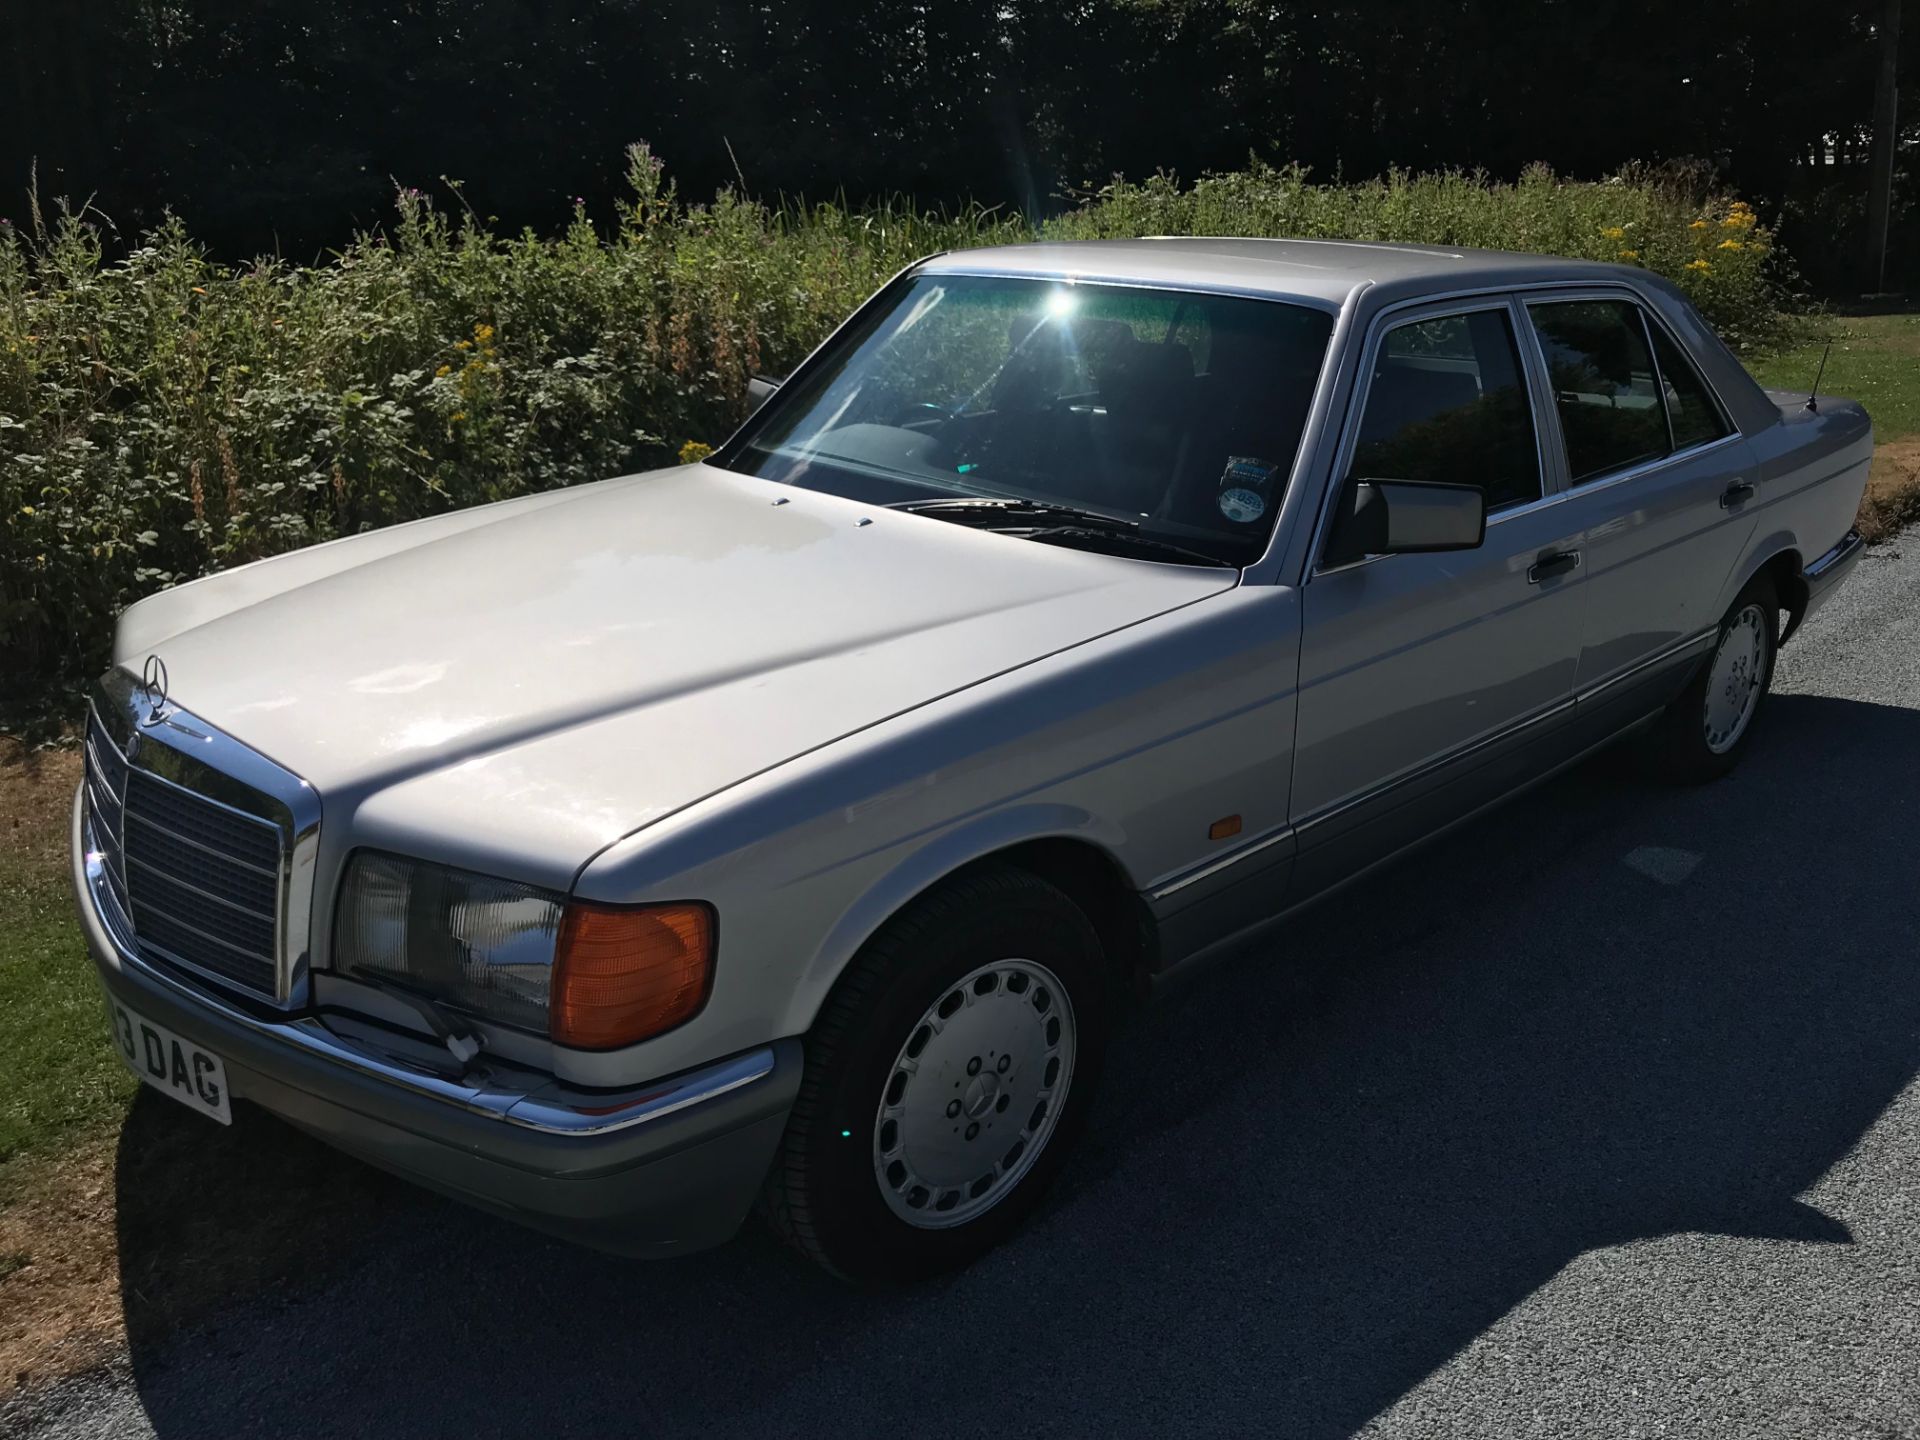 Mercedes 300 SE Automatic - Image 27 of 69